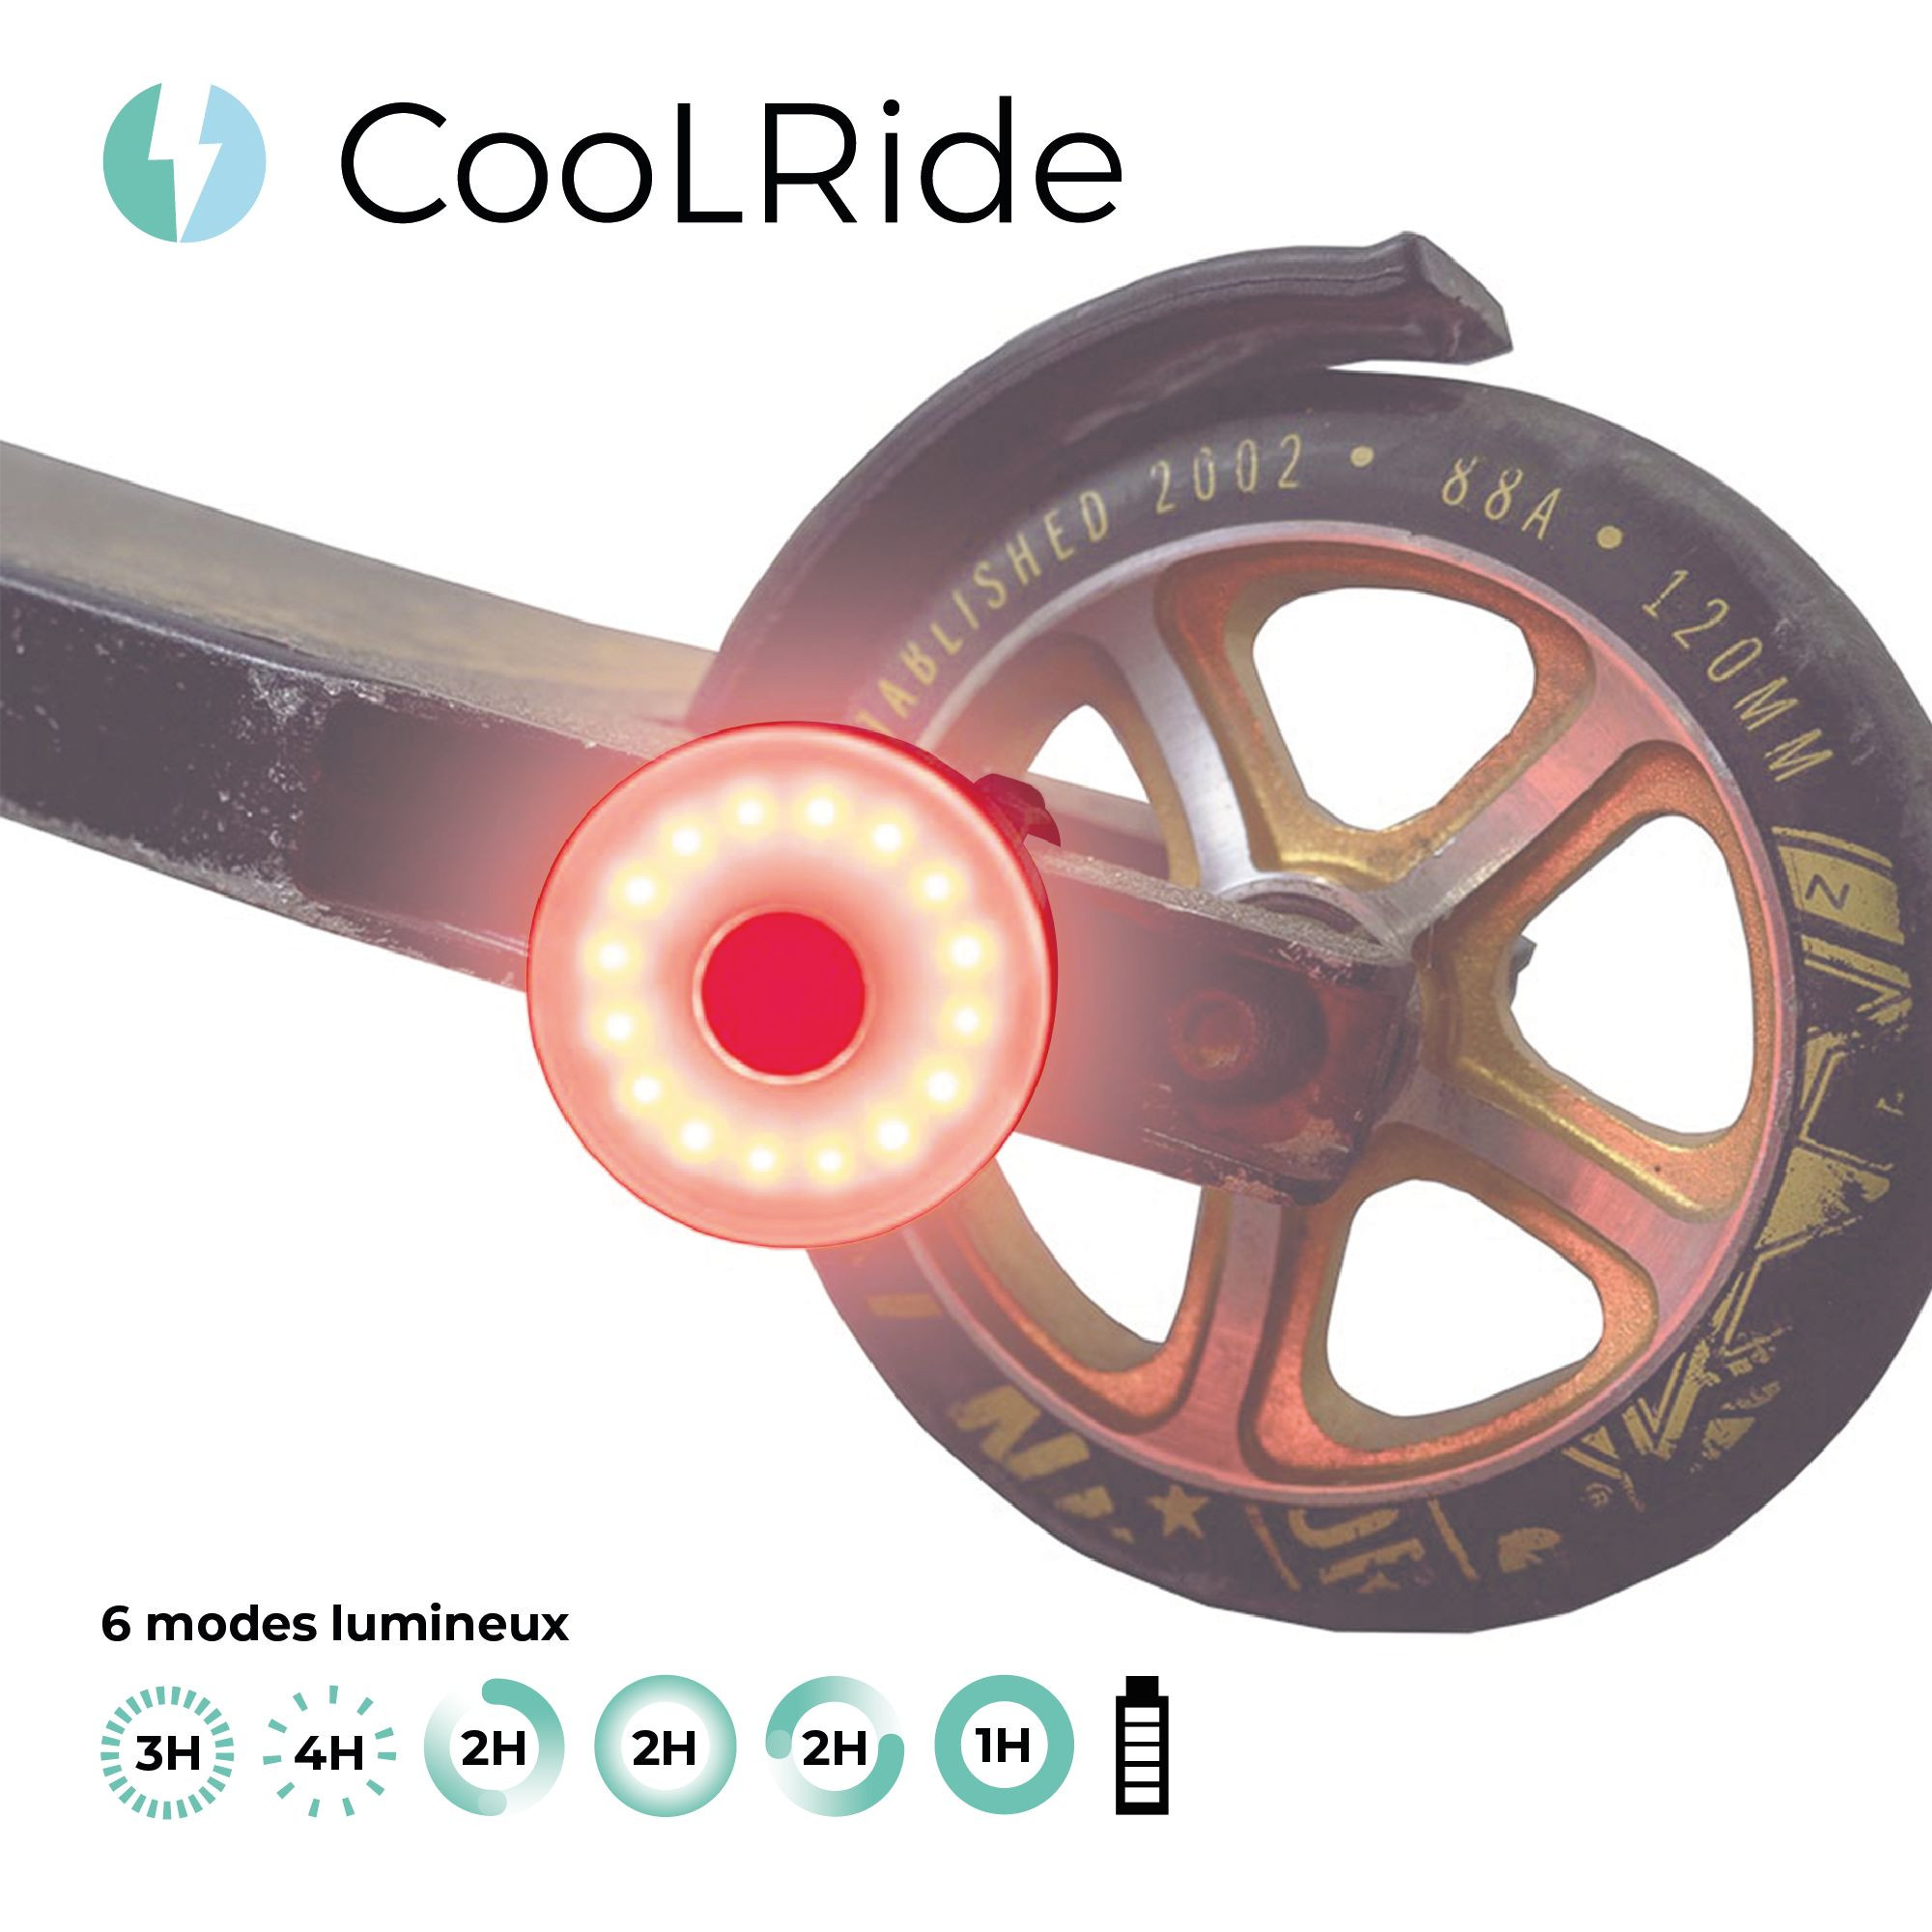 Cool ride ECLAIRAGE MULTI-USAGES RECHARGEABLE USB